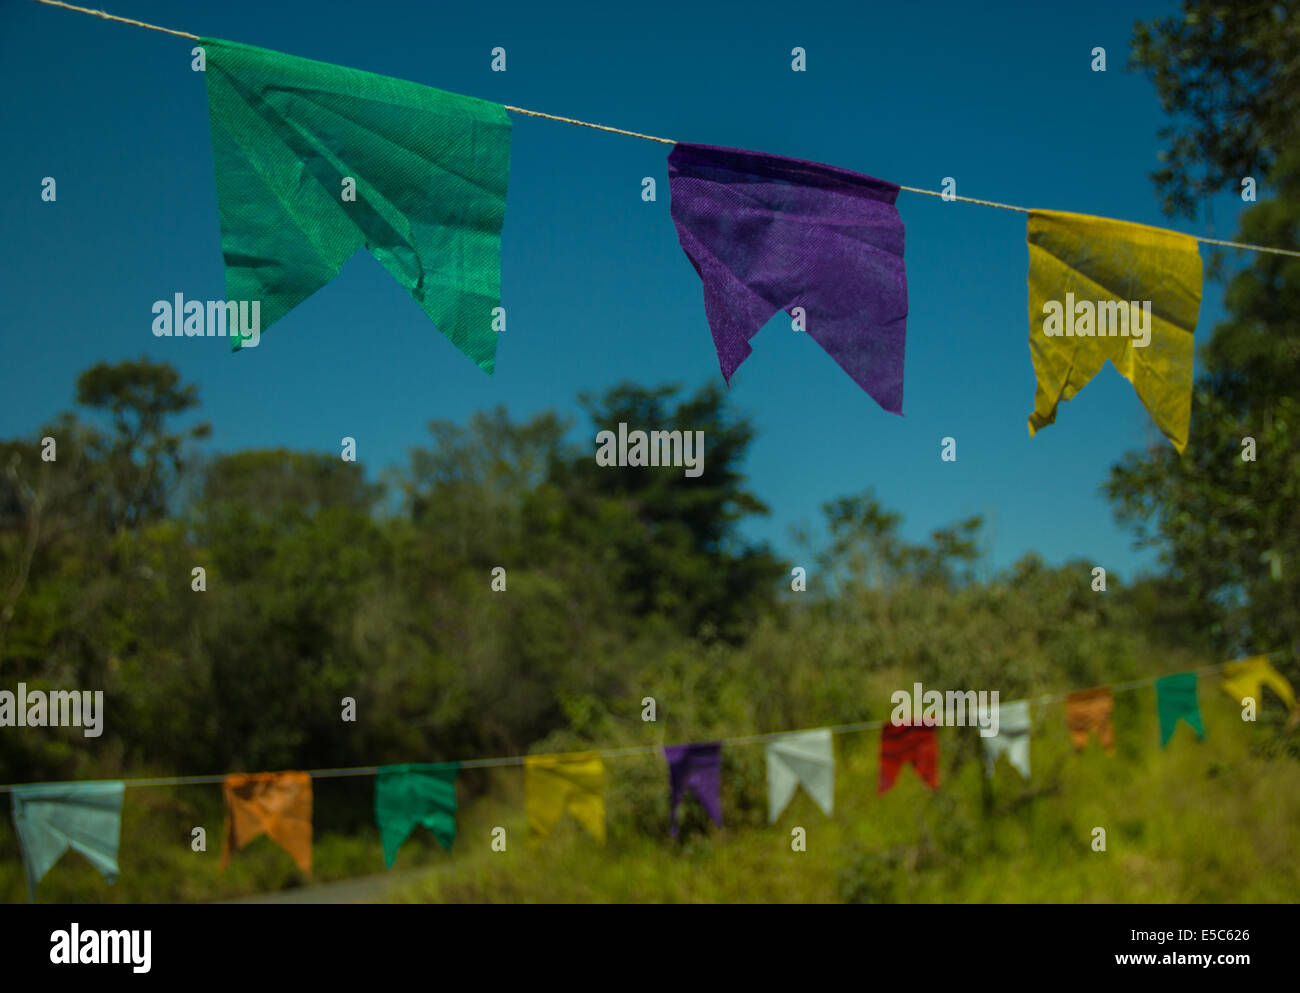 Flags made for the June Party in Brazil countryside. Stock Photo